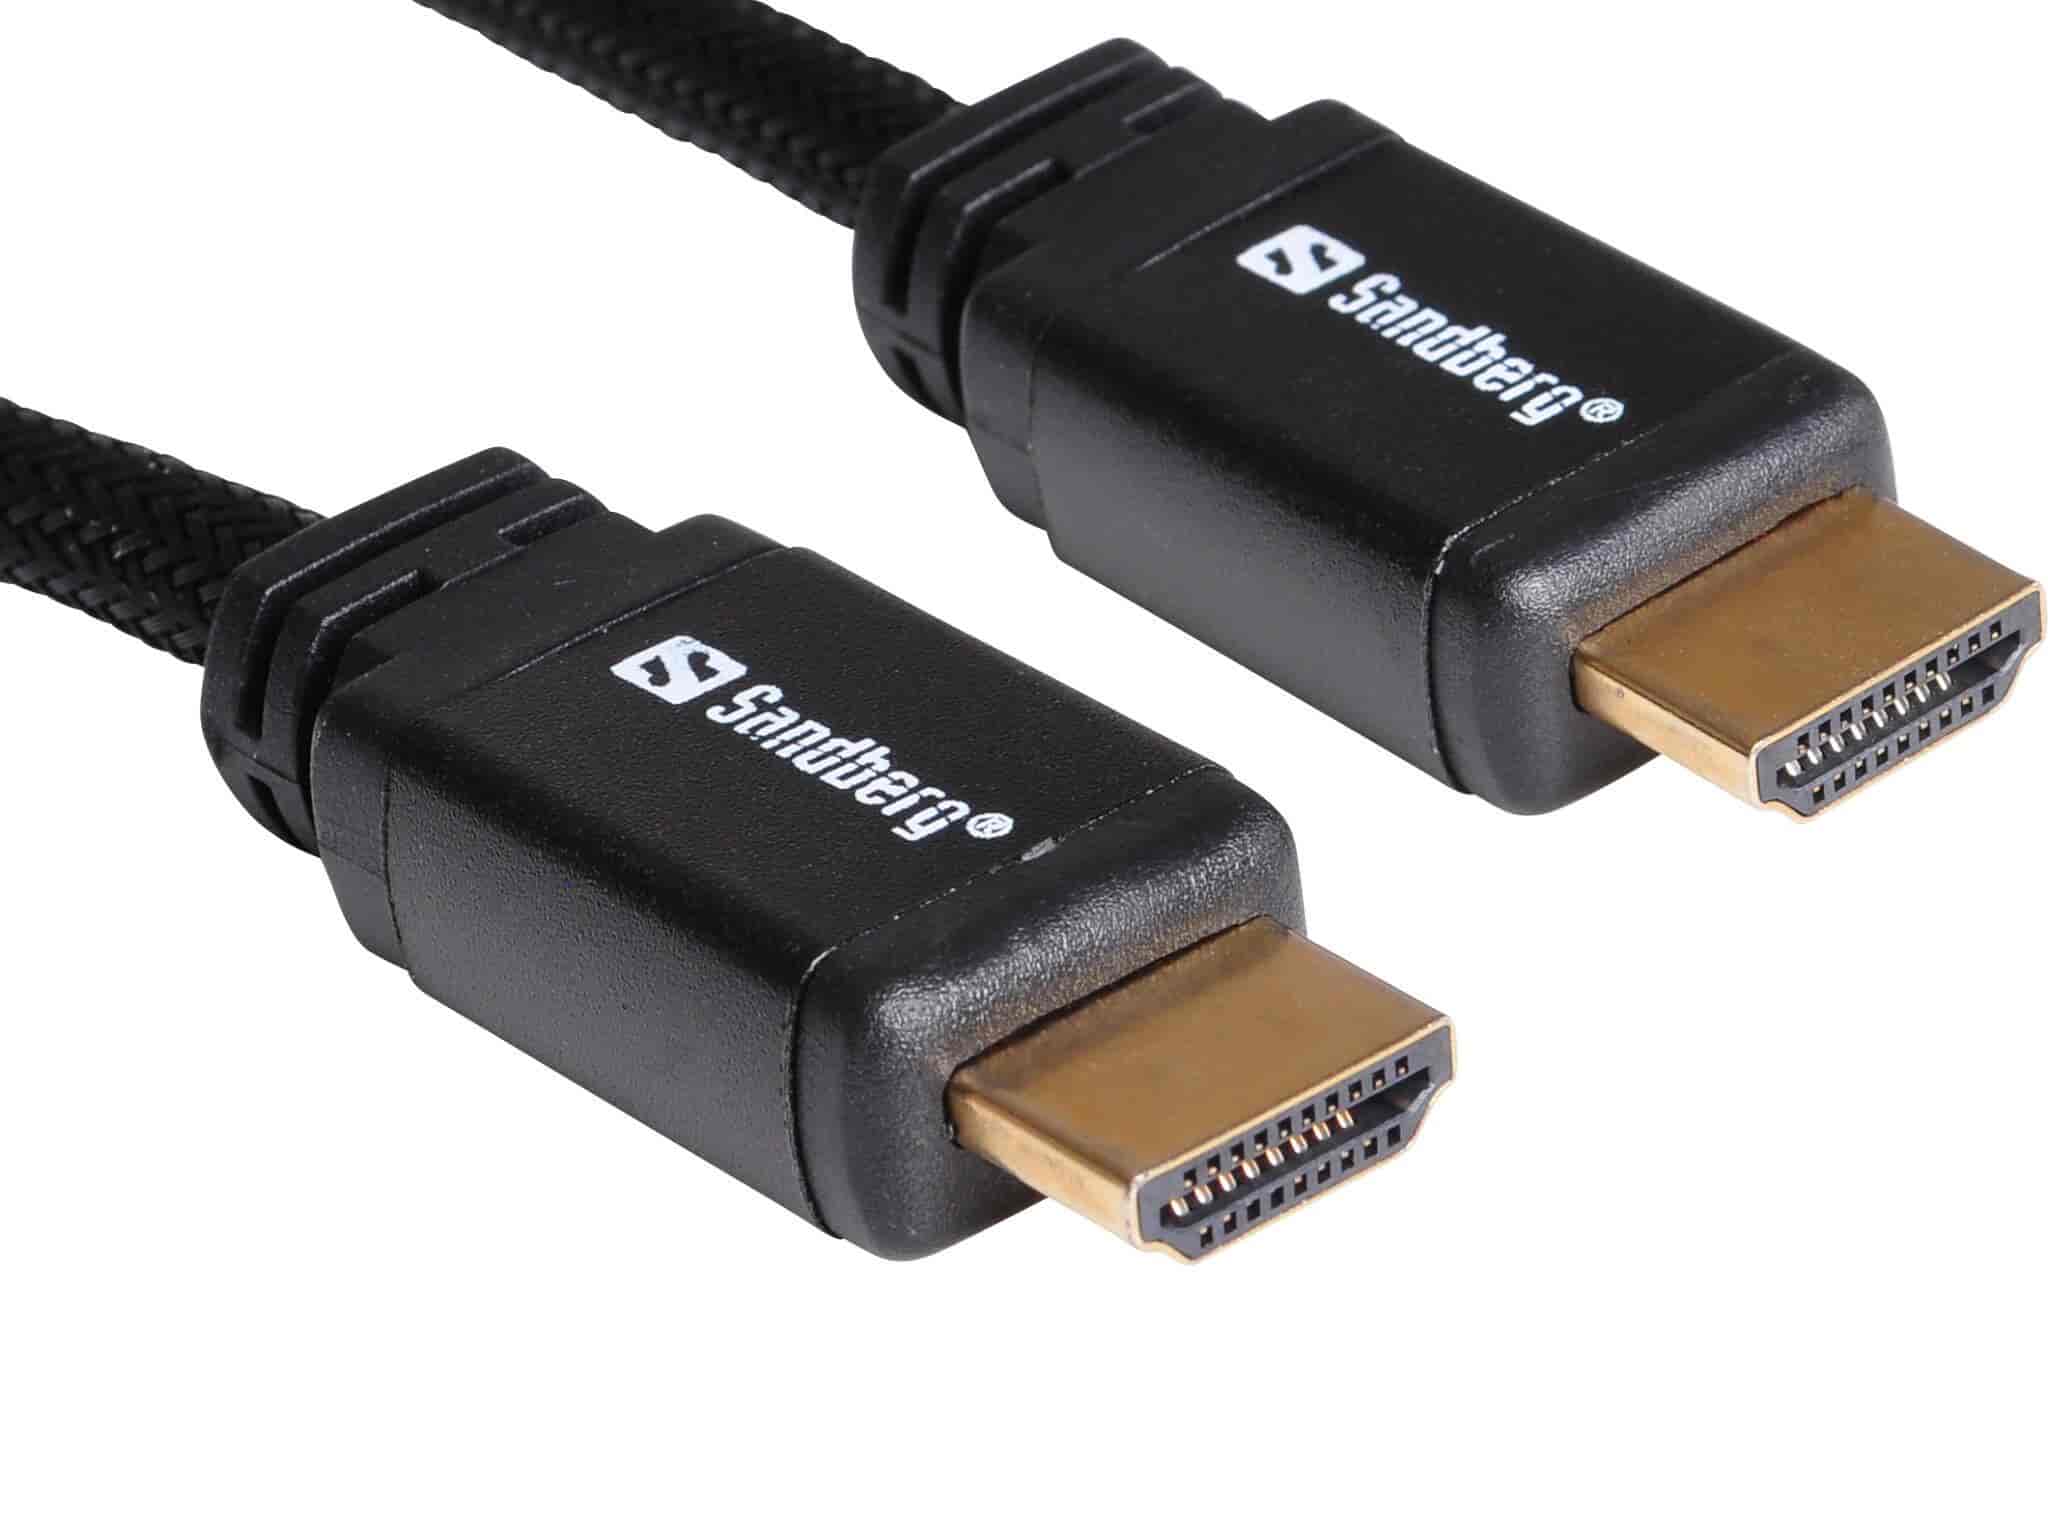 Sandberg HDMI 2.0 19M-19M, 5mWith HDMI you can transfer razor-sharp digital quality sound and images. You can use this cable to connect HDMI devices like your Blu-Ray player or games console to your TV with an HDMI connector.Sandberg